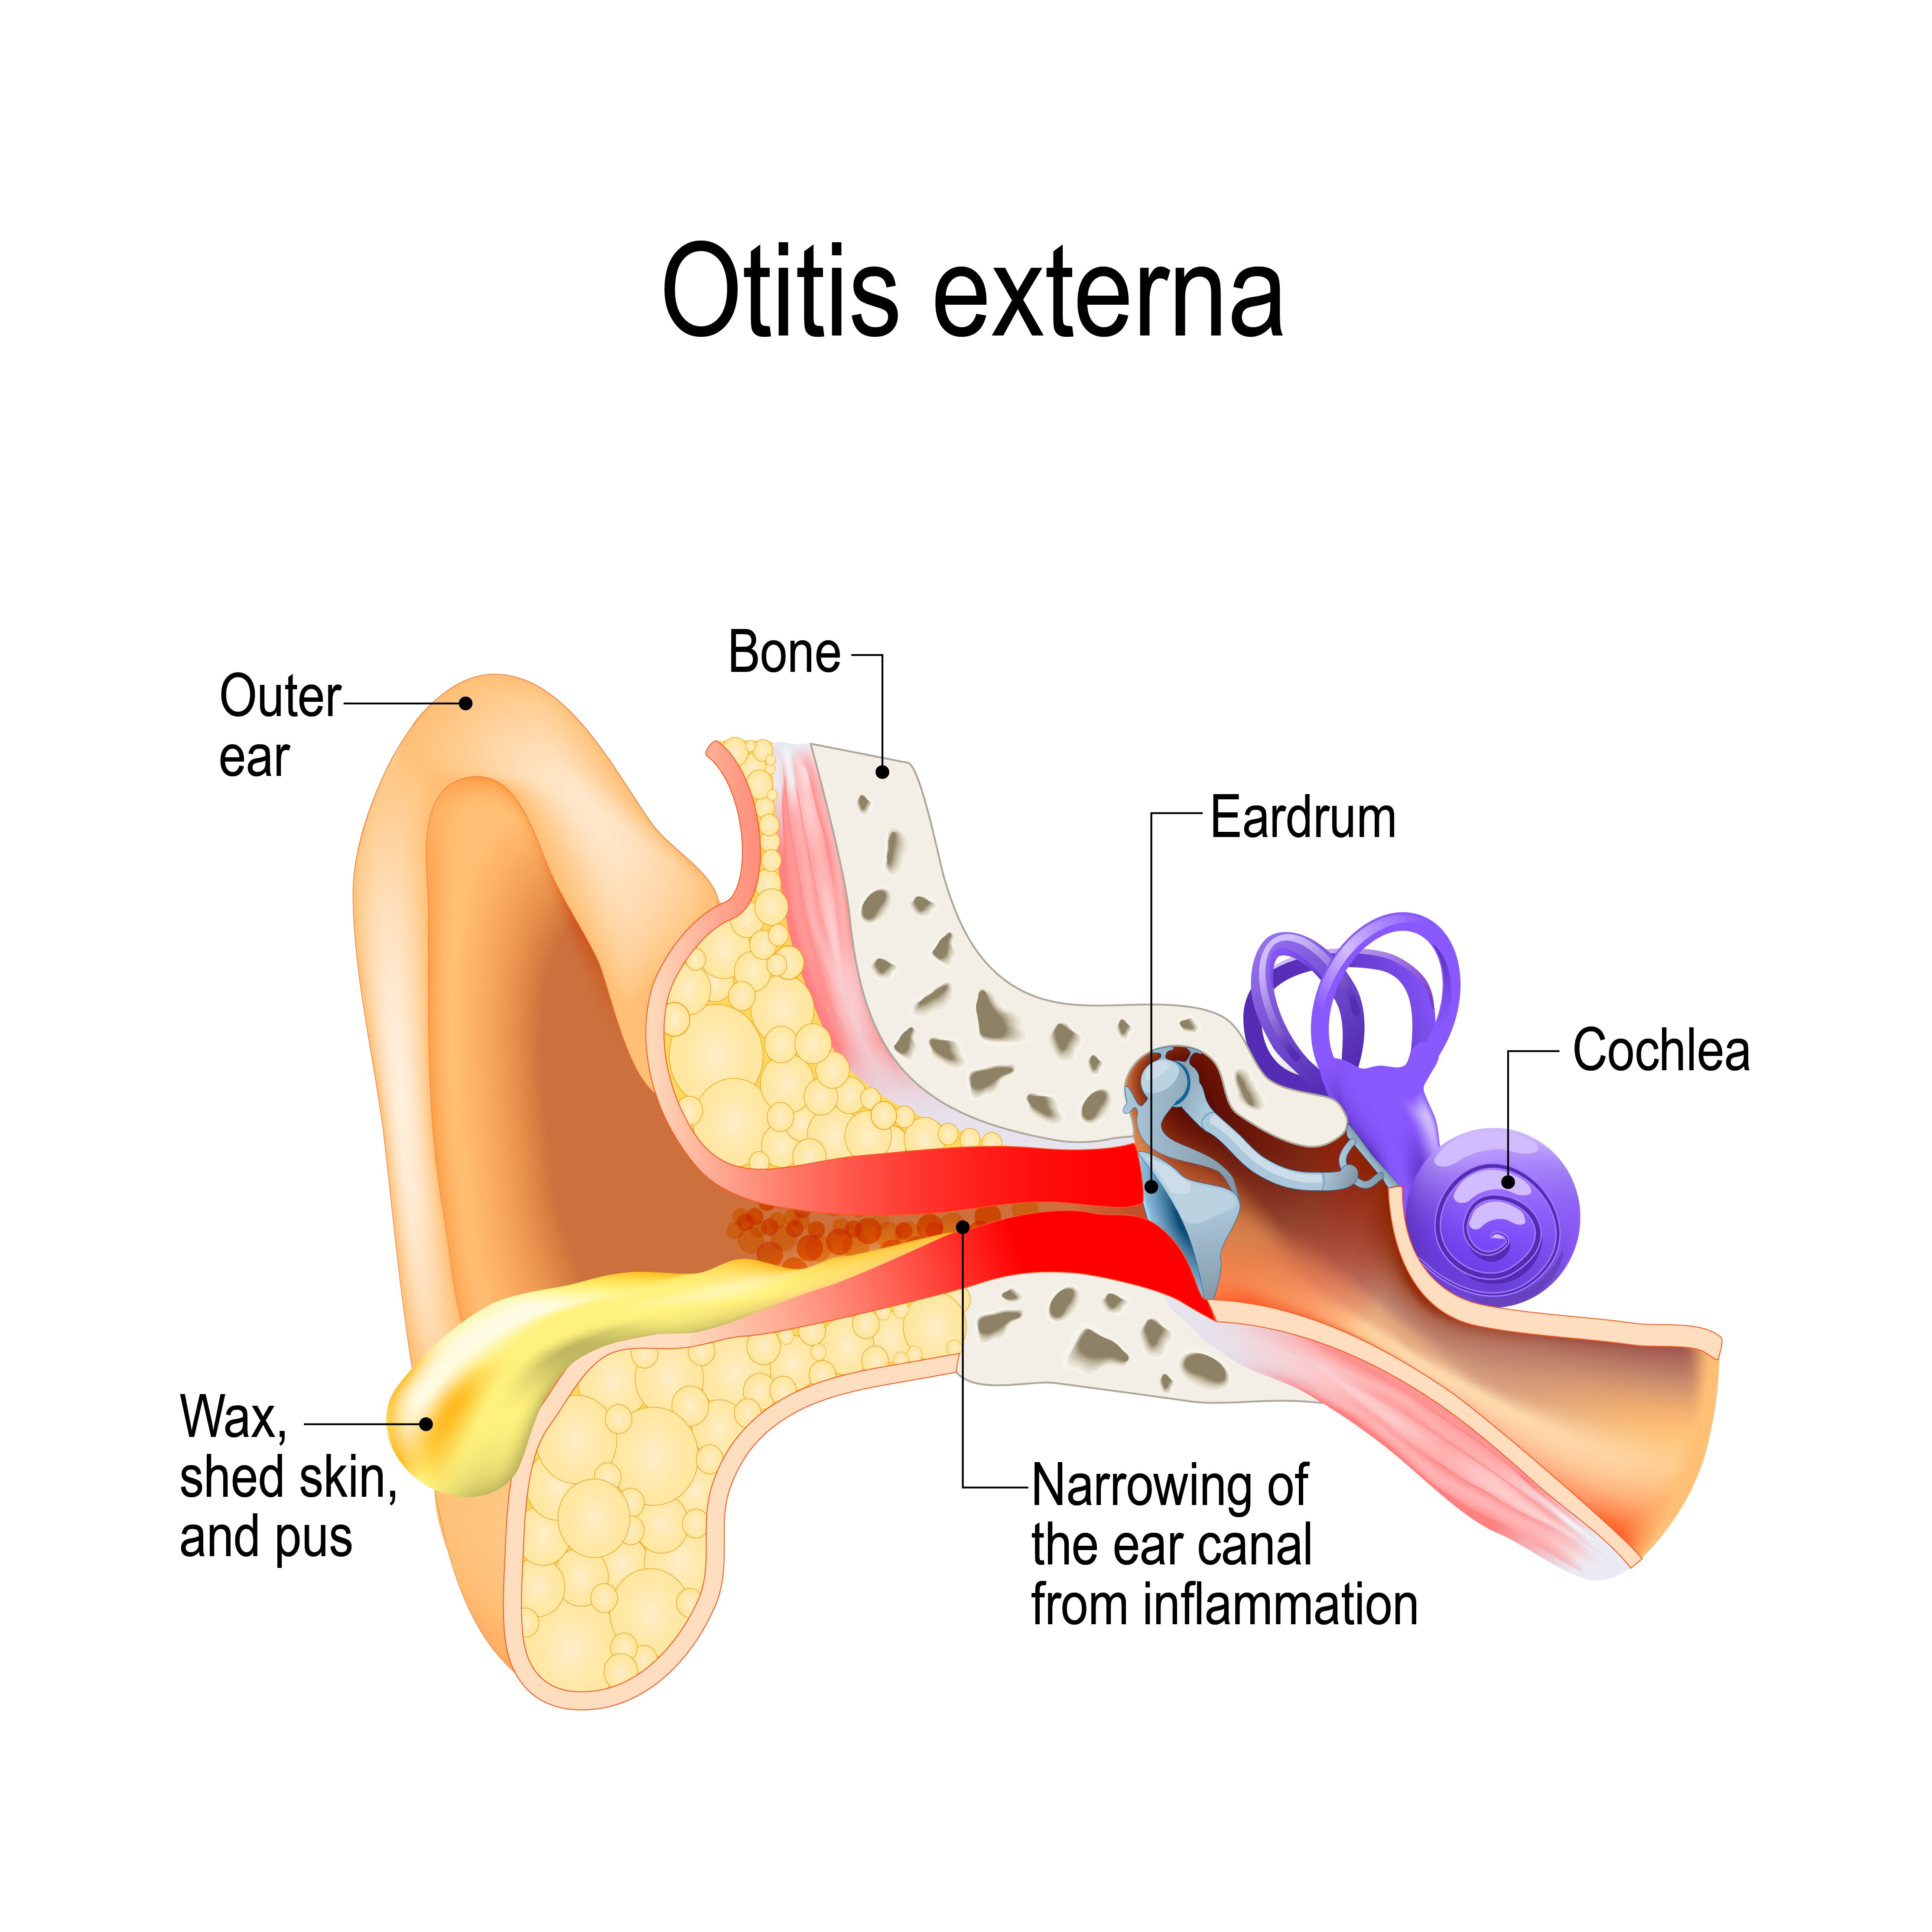 An illustration showing inflammation and narrowing of the ear canal